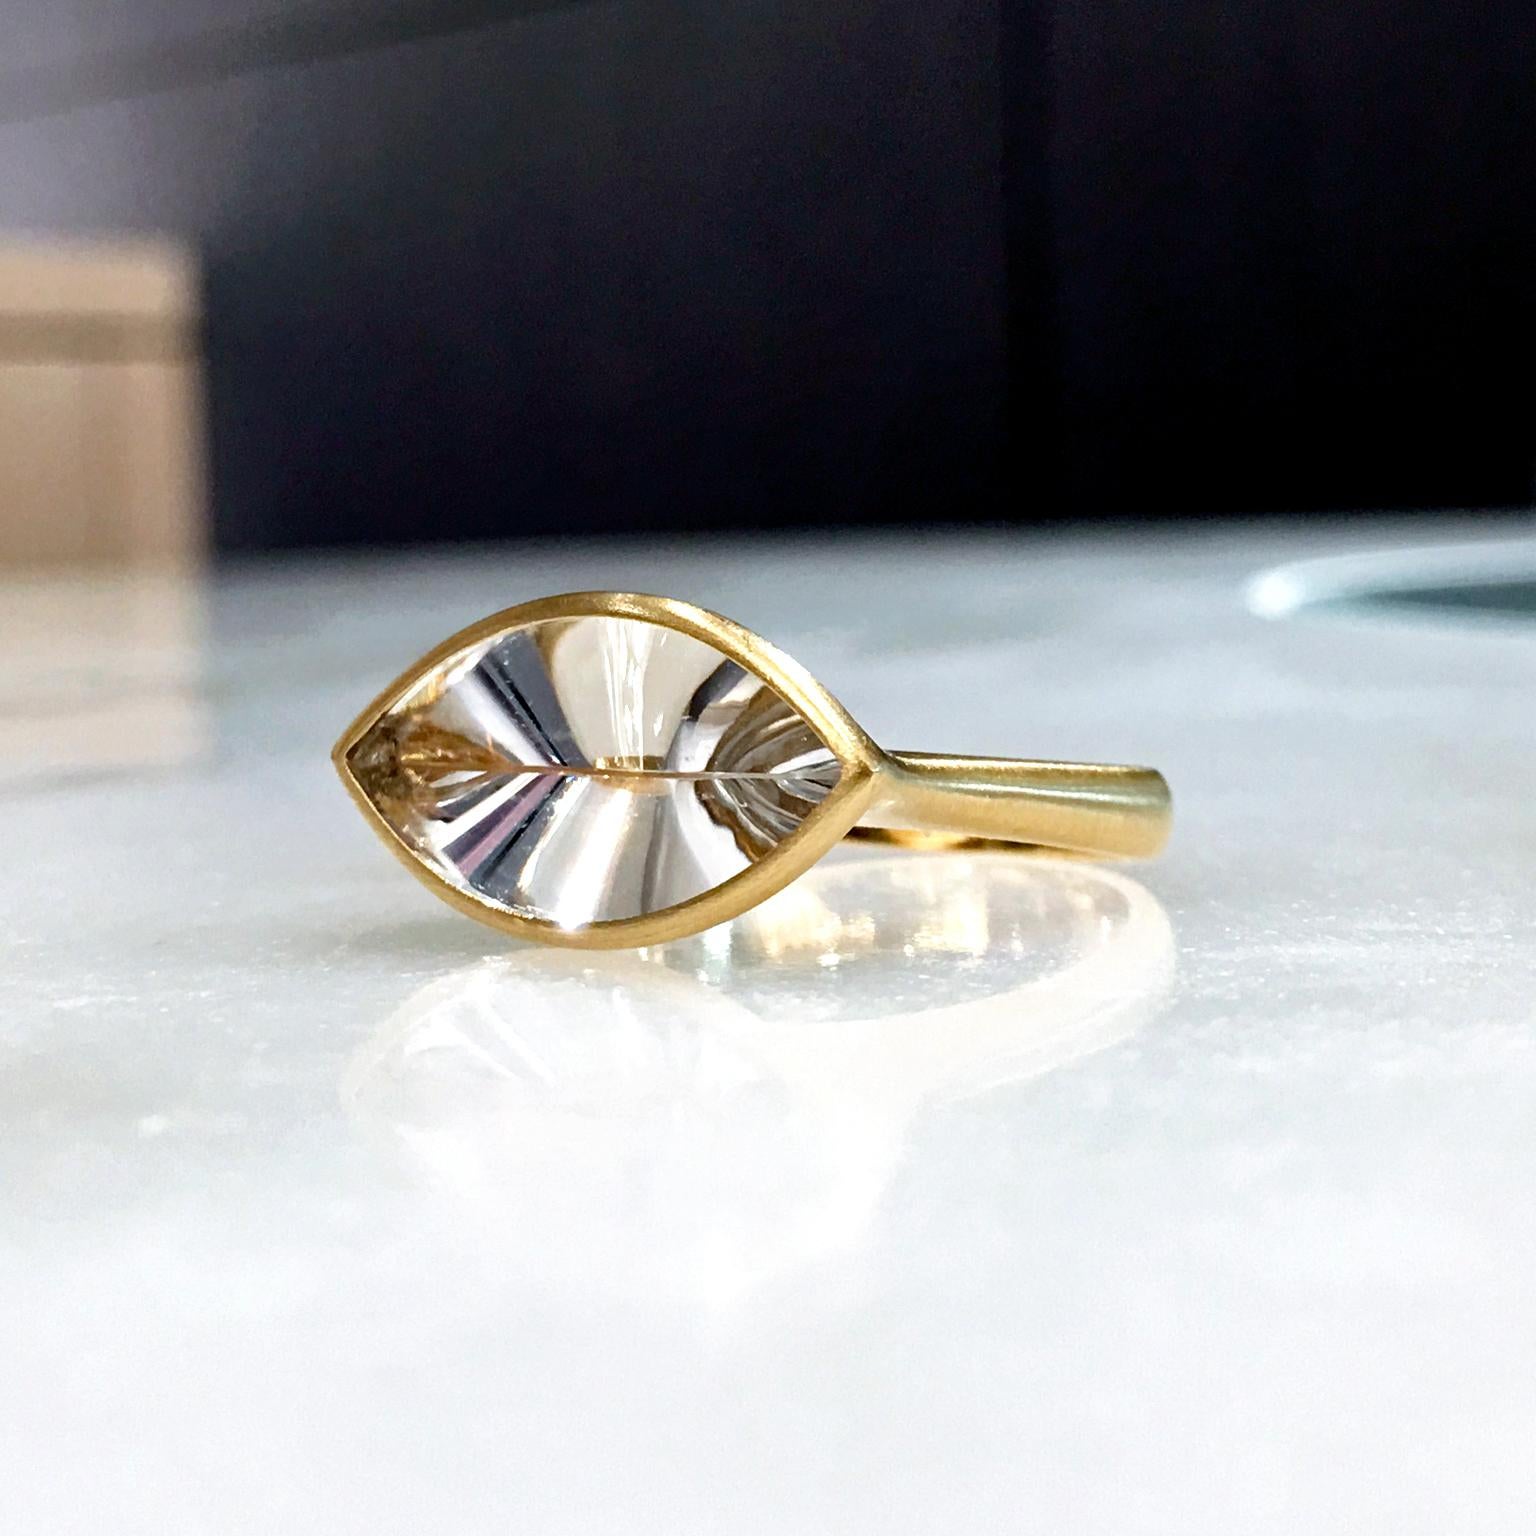 Shine Ring handcrafted by renowned Brazilian jewellery artist Antonio Bernardo in matte-finished 18k yellow gold with a custom-cut prismatic colorless rock crystal quartz bezel-set on a graduated 18k gold shank. Size 7.0 (can be sized).

Stamped 750